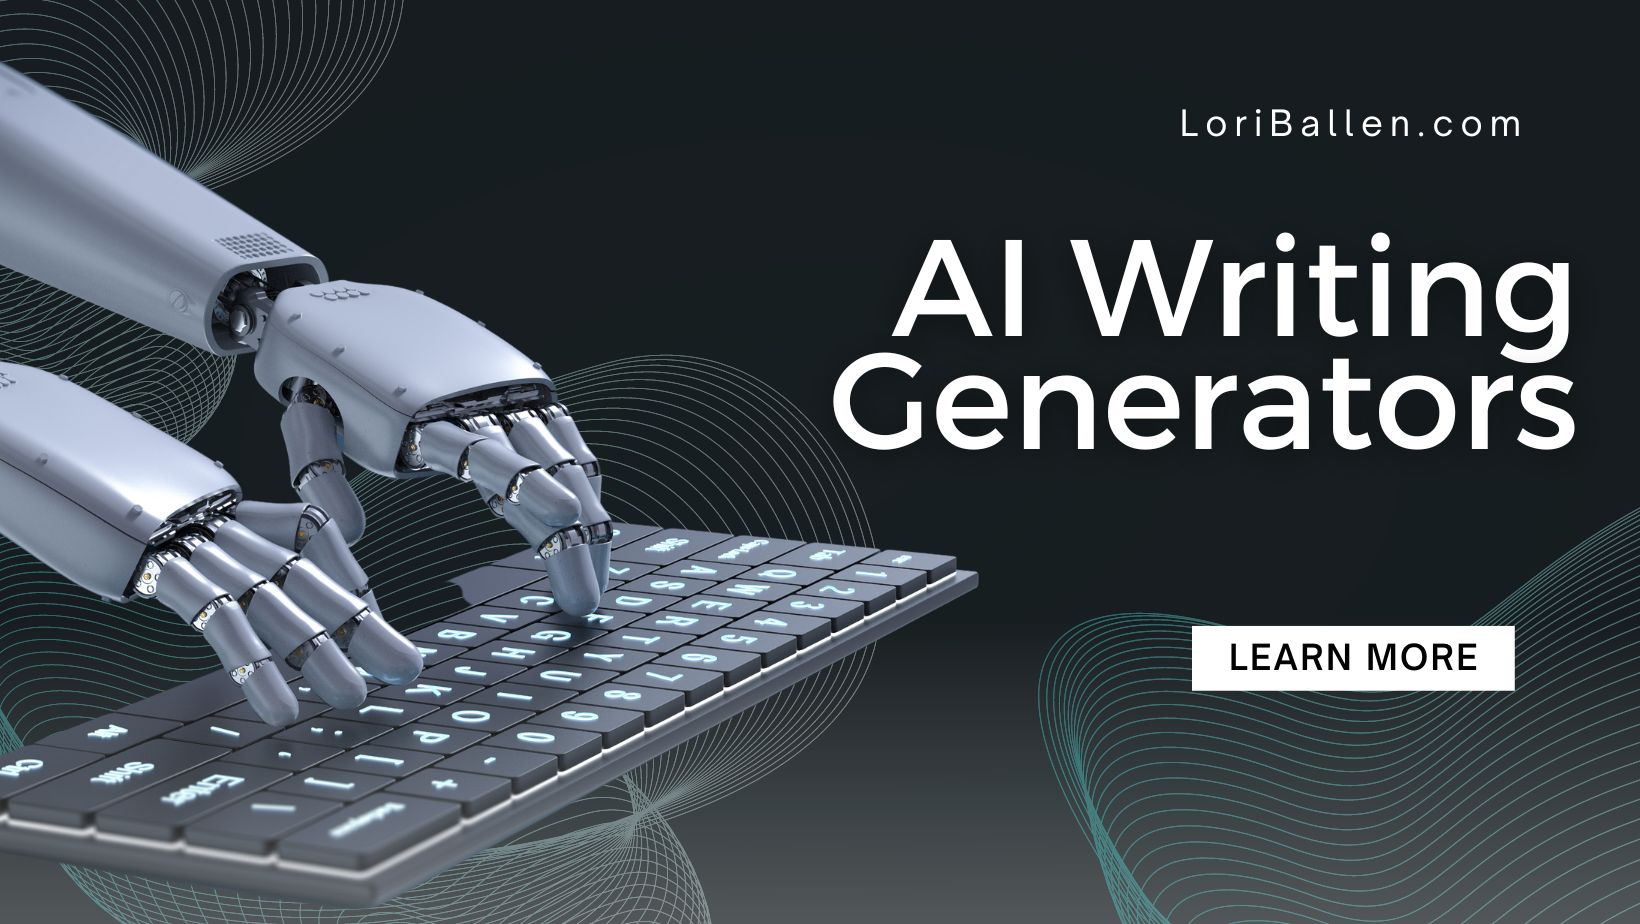 An AI writing generator like Jasper AI uses artificial intelligence to analyze a prompt and generate original content based on it.